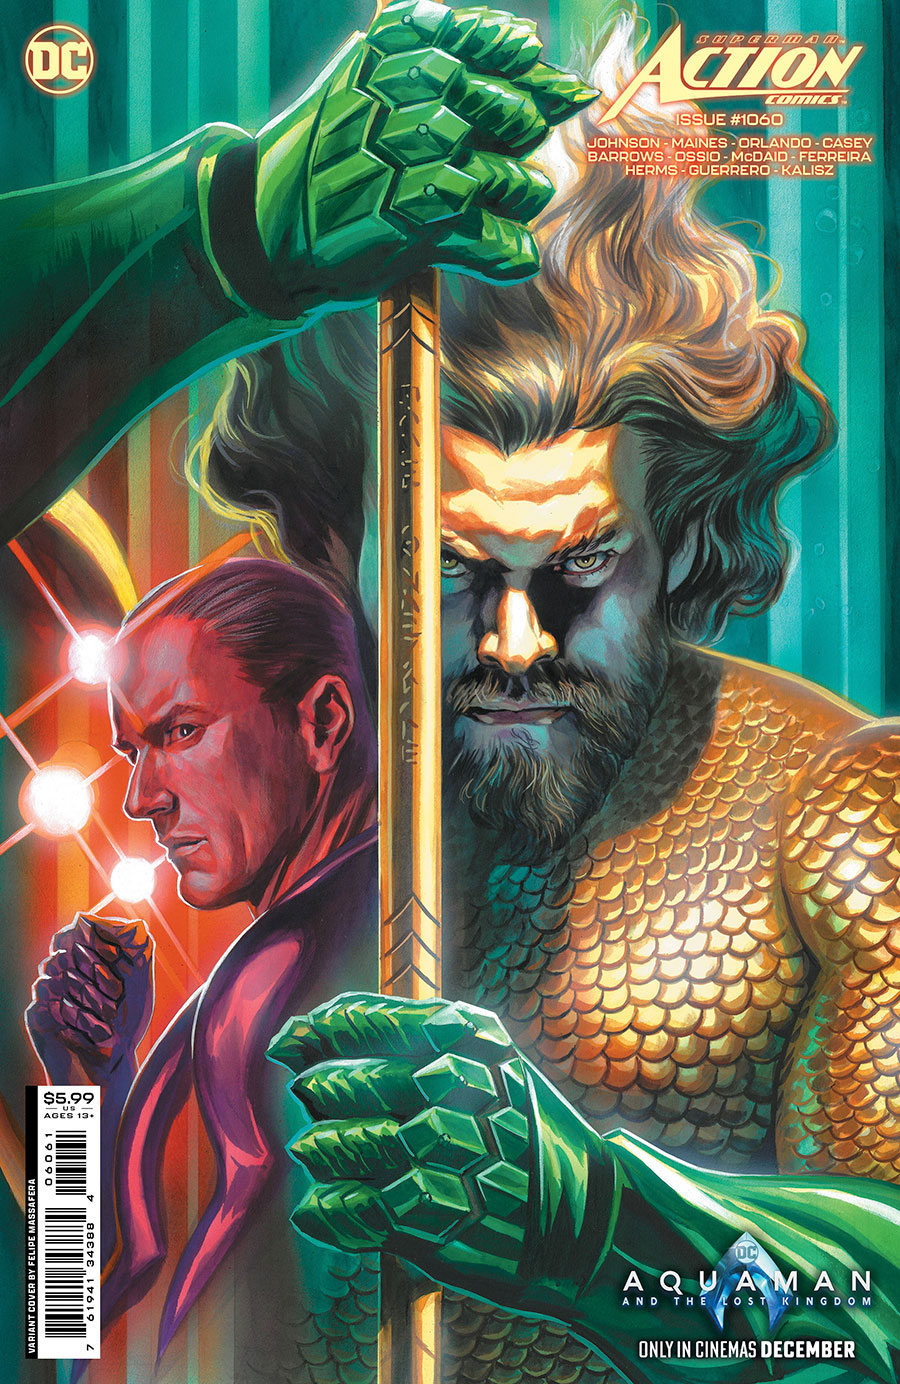 Action Comics Vol 2 #1060 Cover D Variant Felipe Massafera Aquaman And The Lost Kingdom Card Stock Cover (Titans Beast World Tie-In)